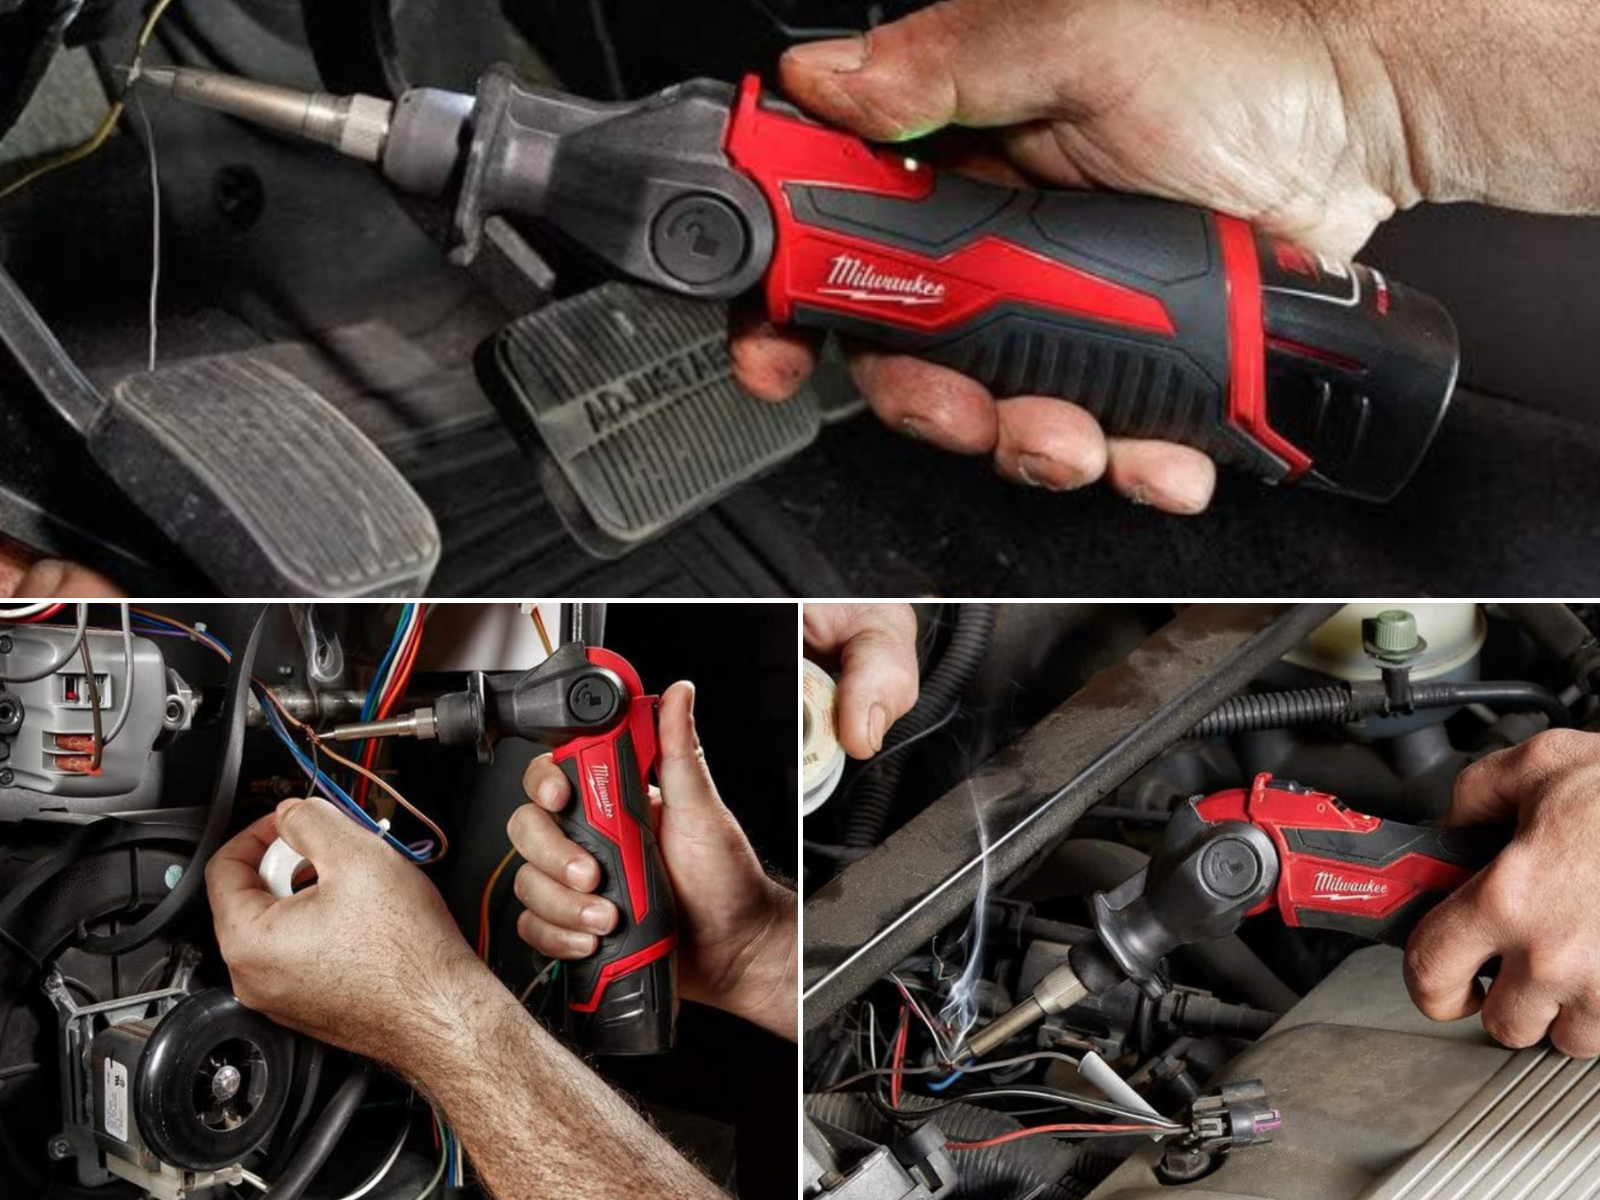 The M12 soldering iron being used in all 3 positions while working on a car.